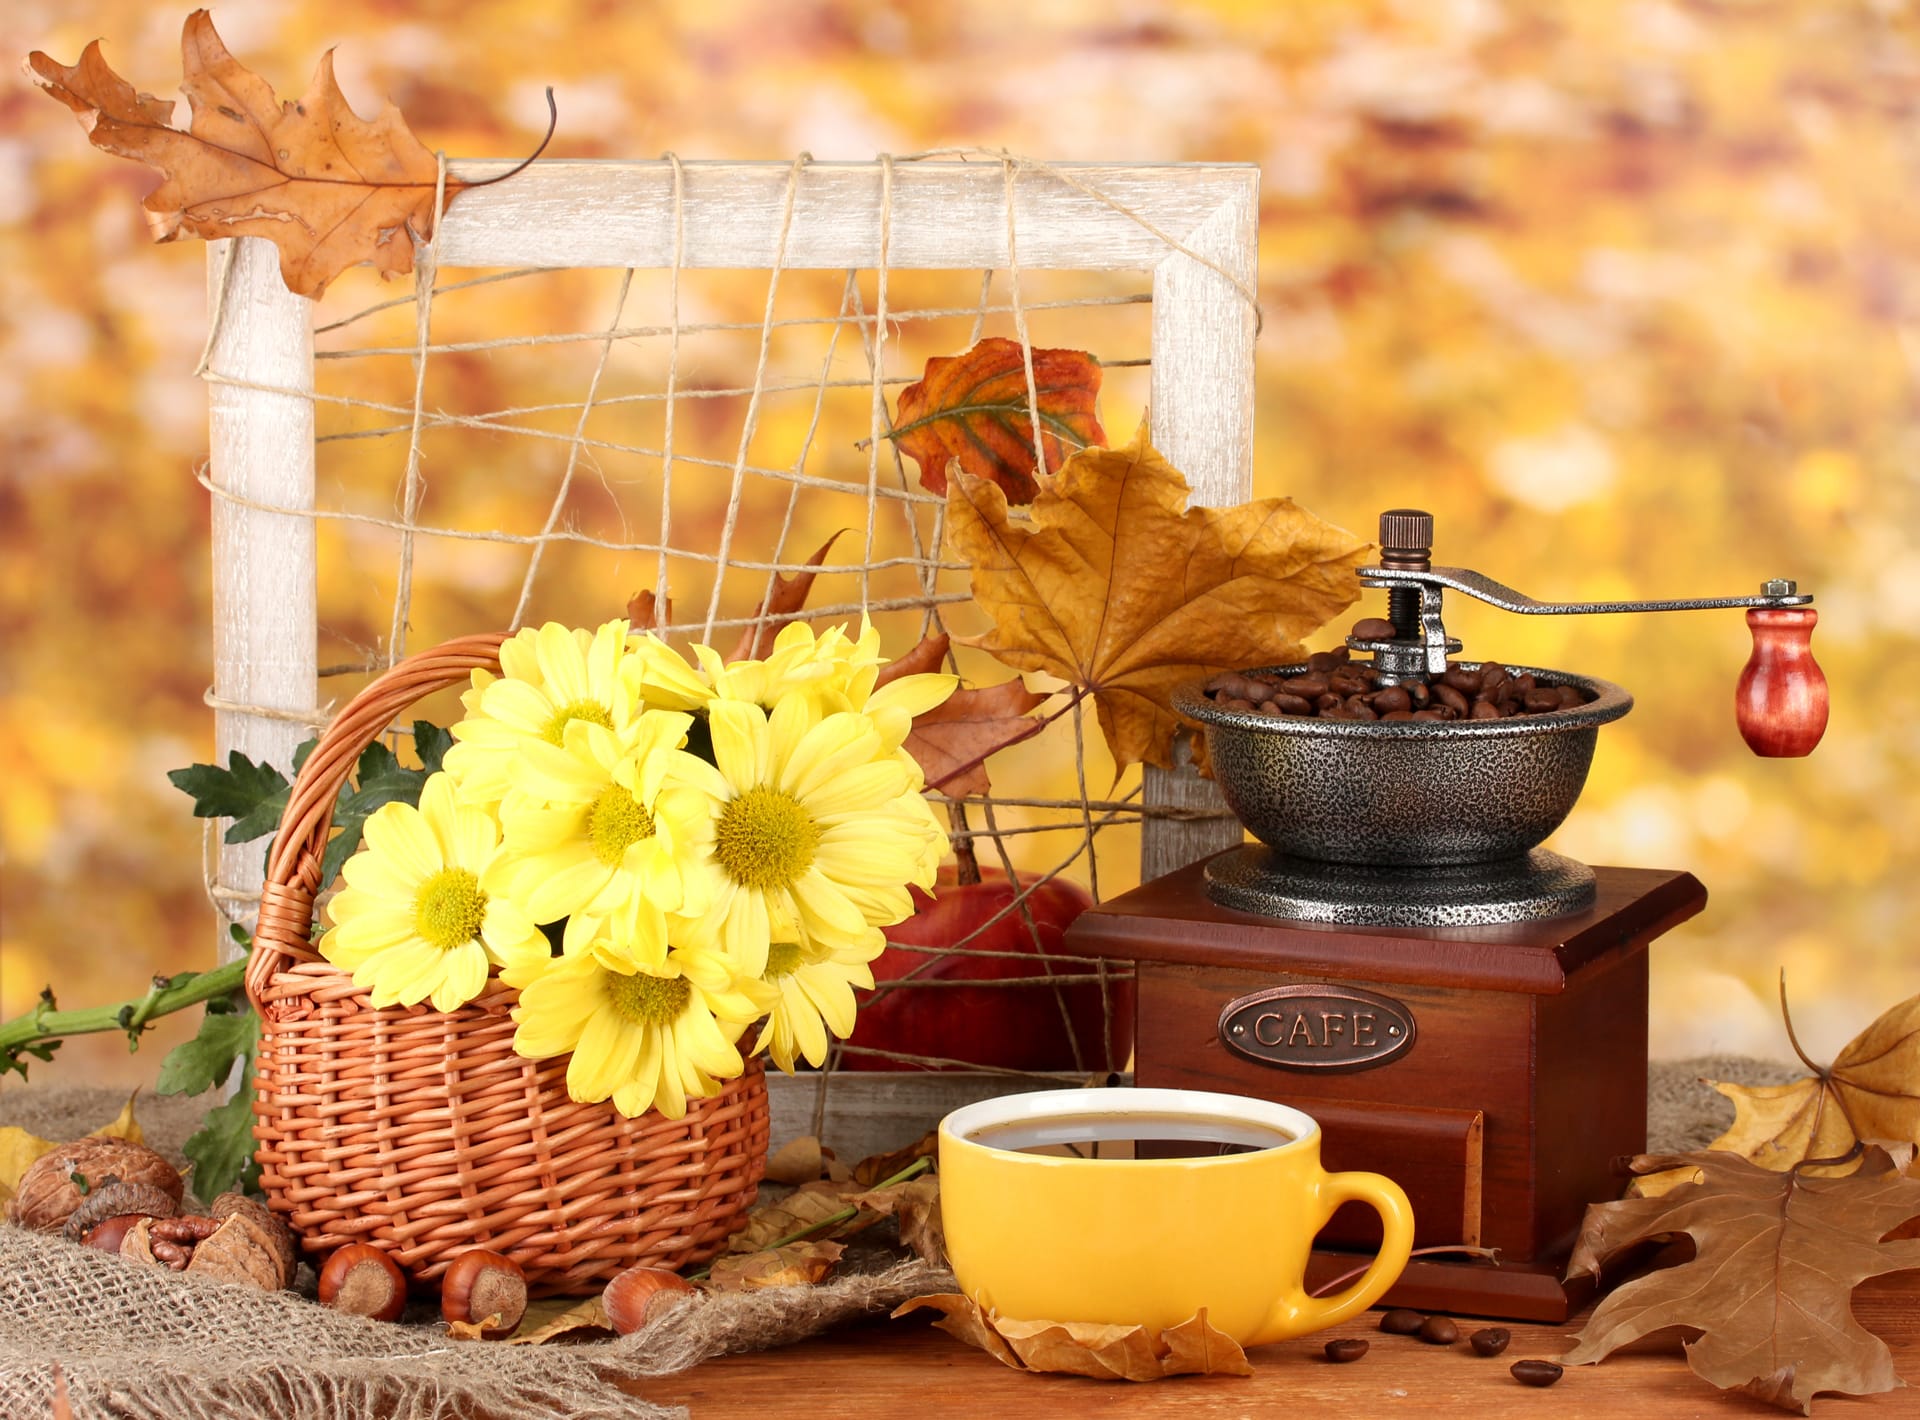 Autumnal compositioncoffee grinder flowers leaves bright background